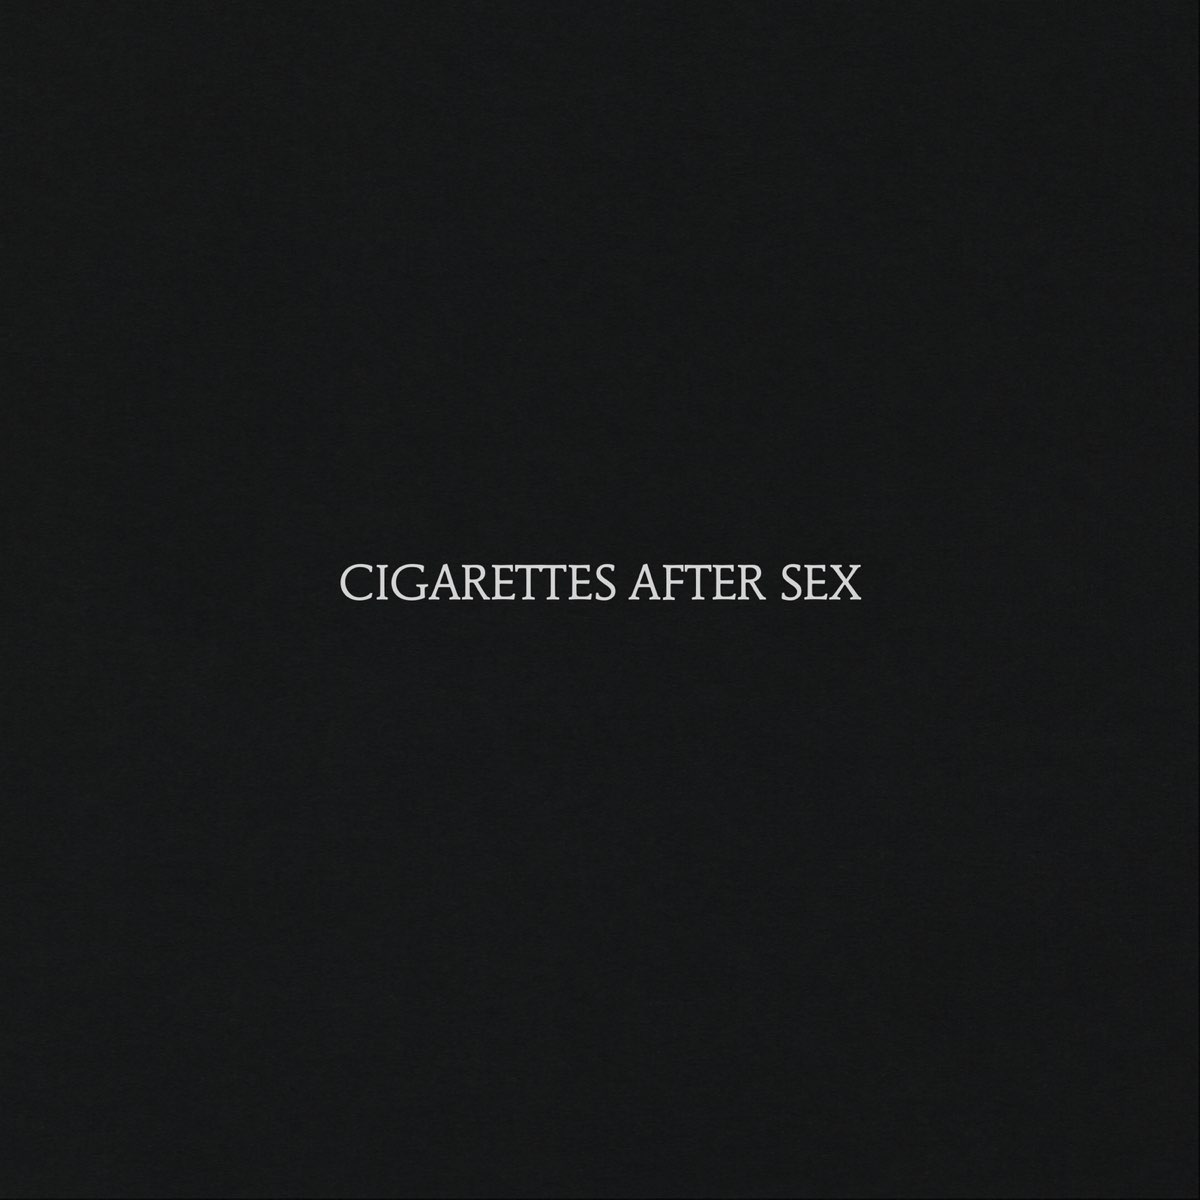 ‎cigarettes After Sex Album By Cigarettes After Sex Apple Music